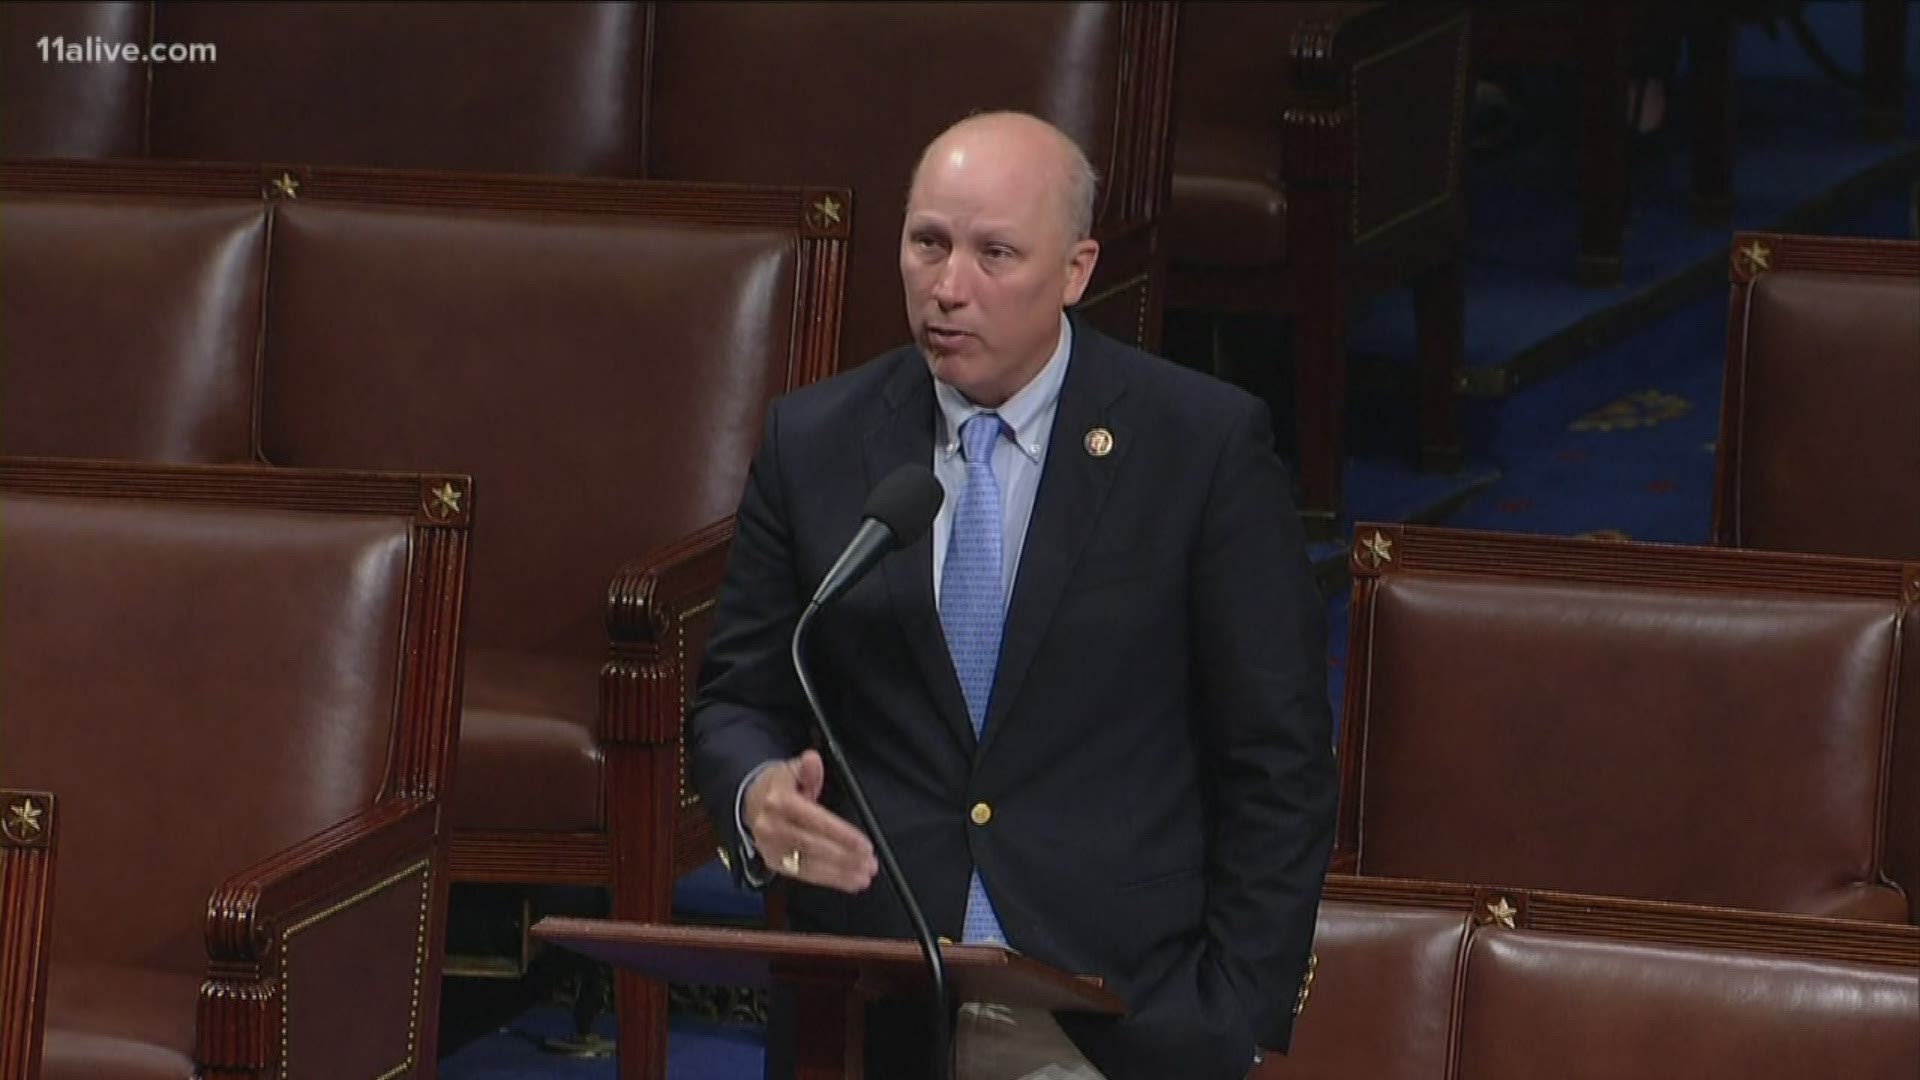 Texas Republican Chip Roy, a former aide to Texas firebrand Sen. Ted Cruz, objected to speeding the measure through a nearly empty chamber.